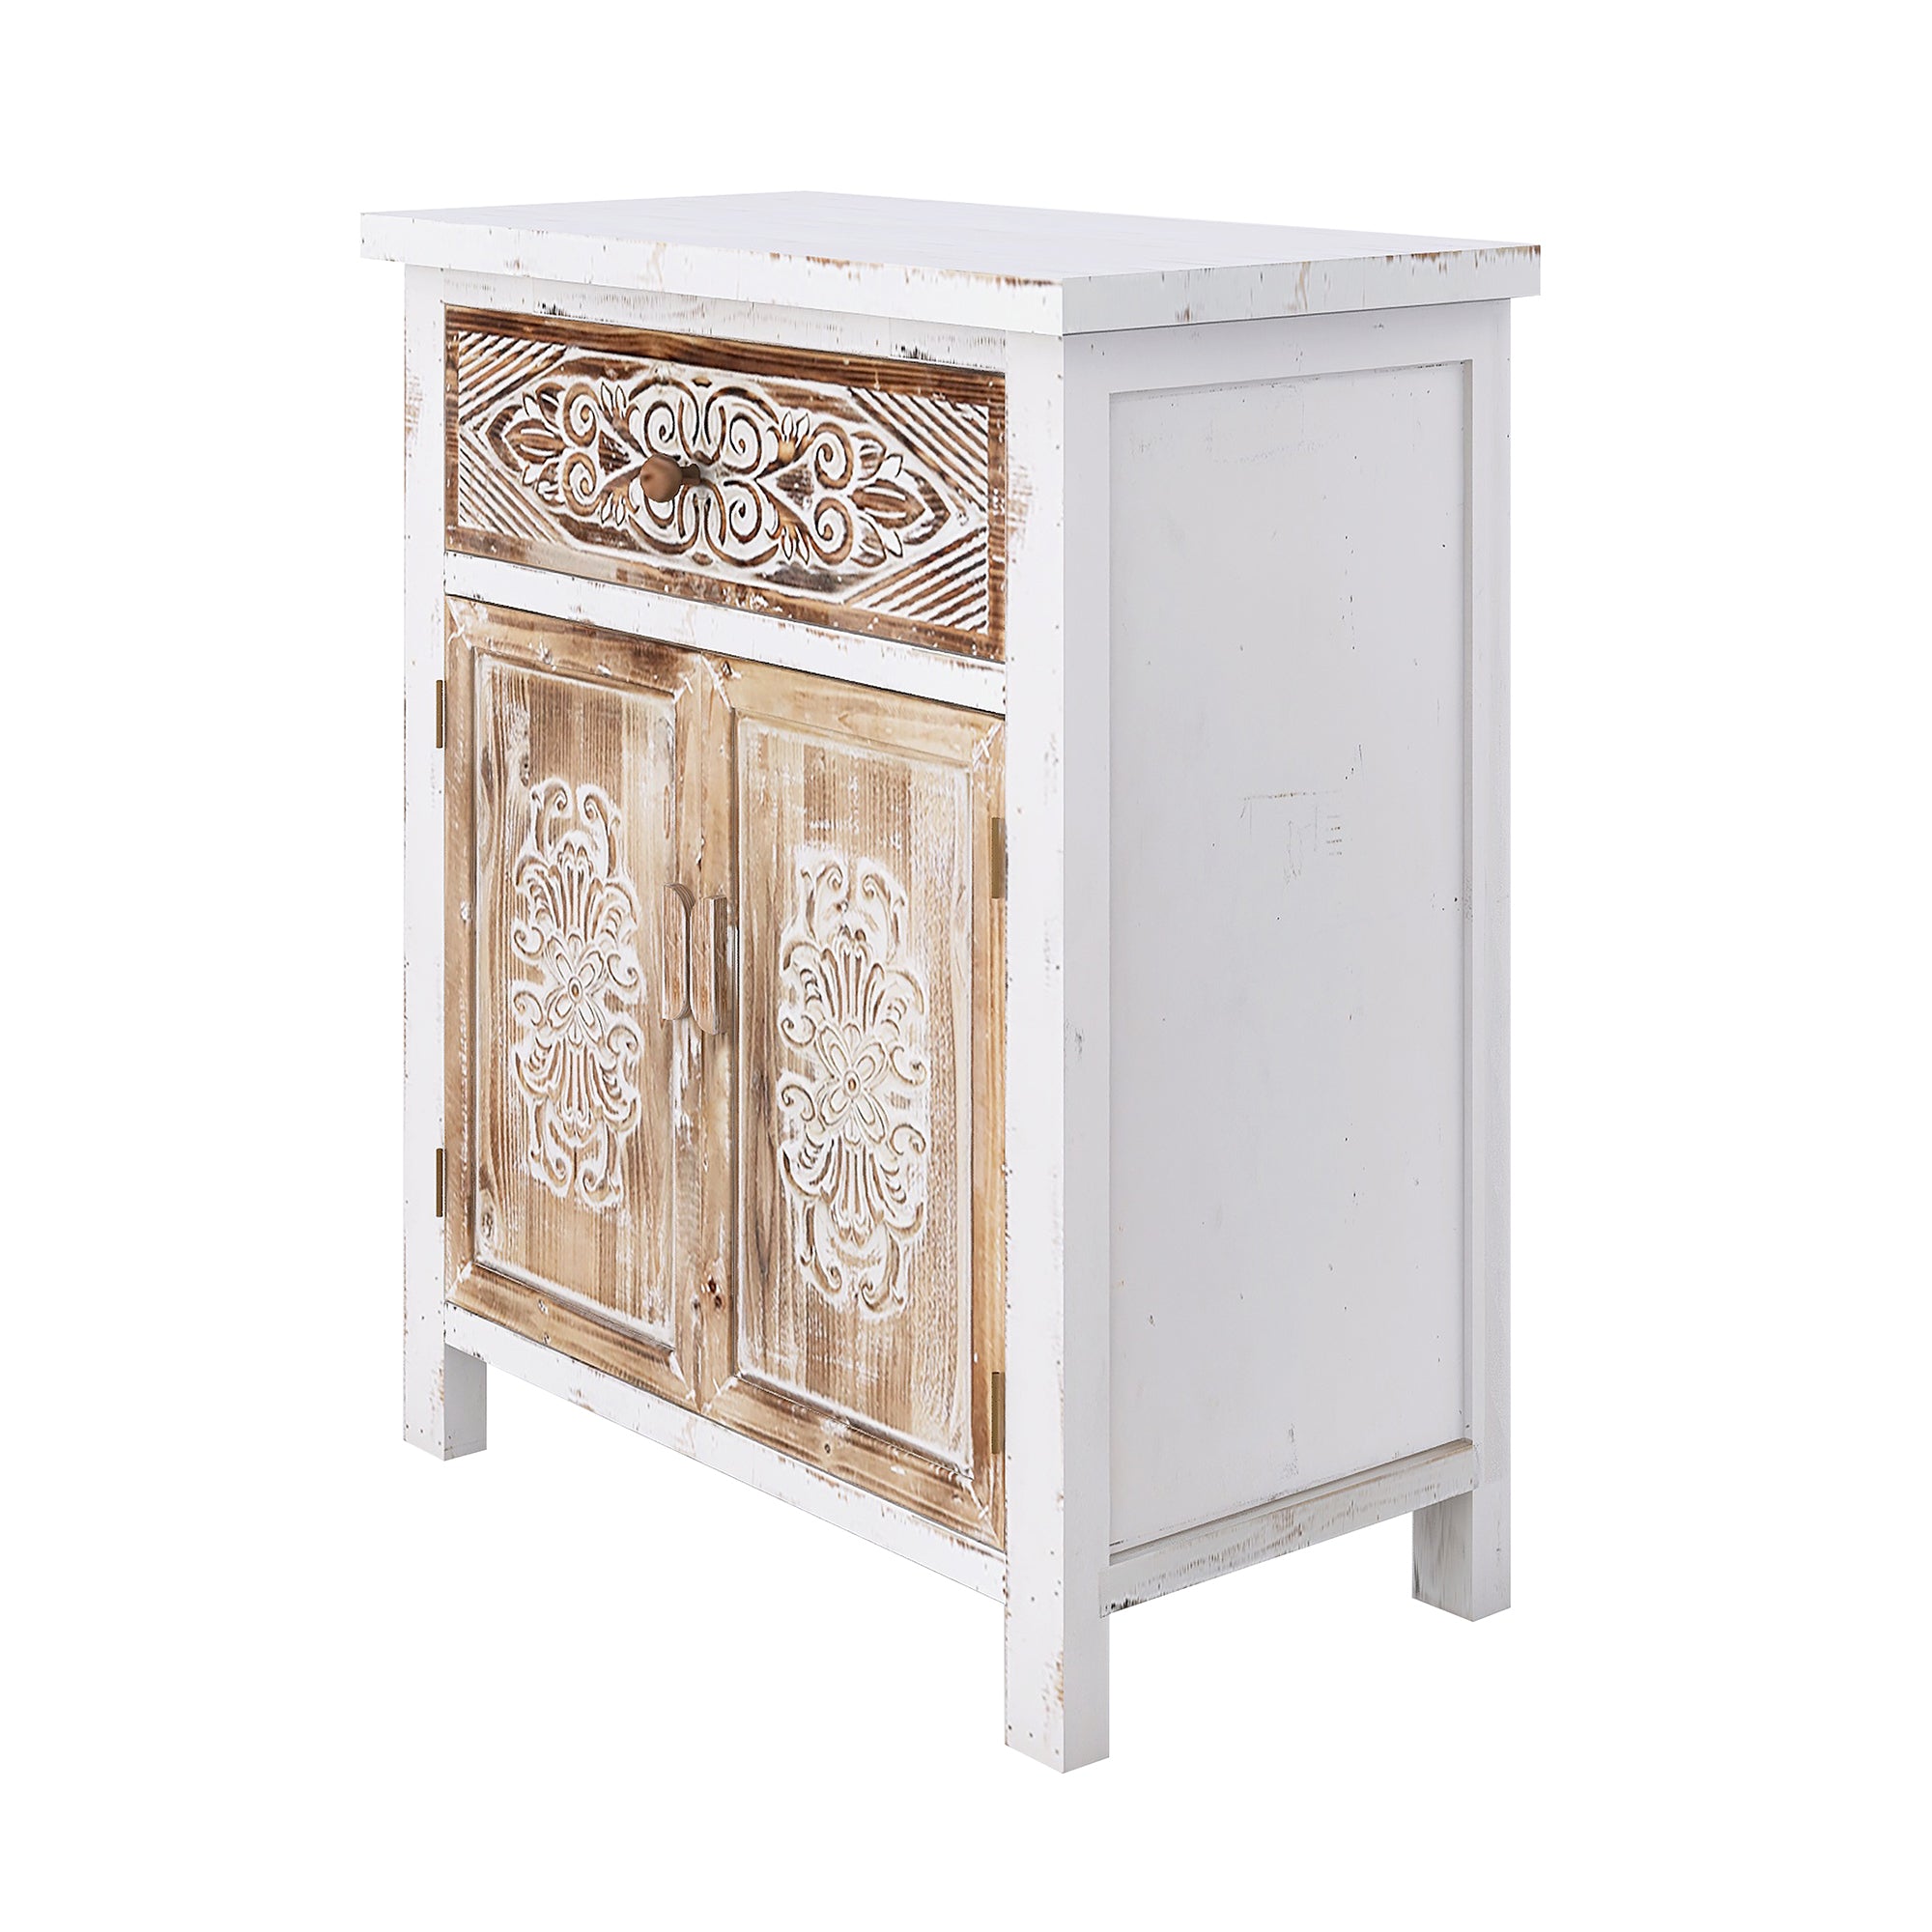 Rustic Wood Carved Cabinet with 1 Drawer and 2 Doors Vintage Accent